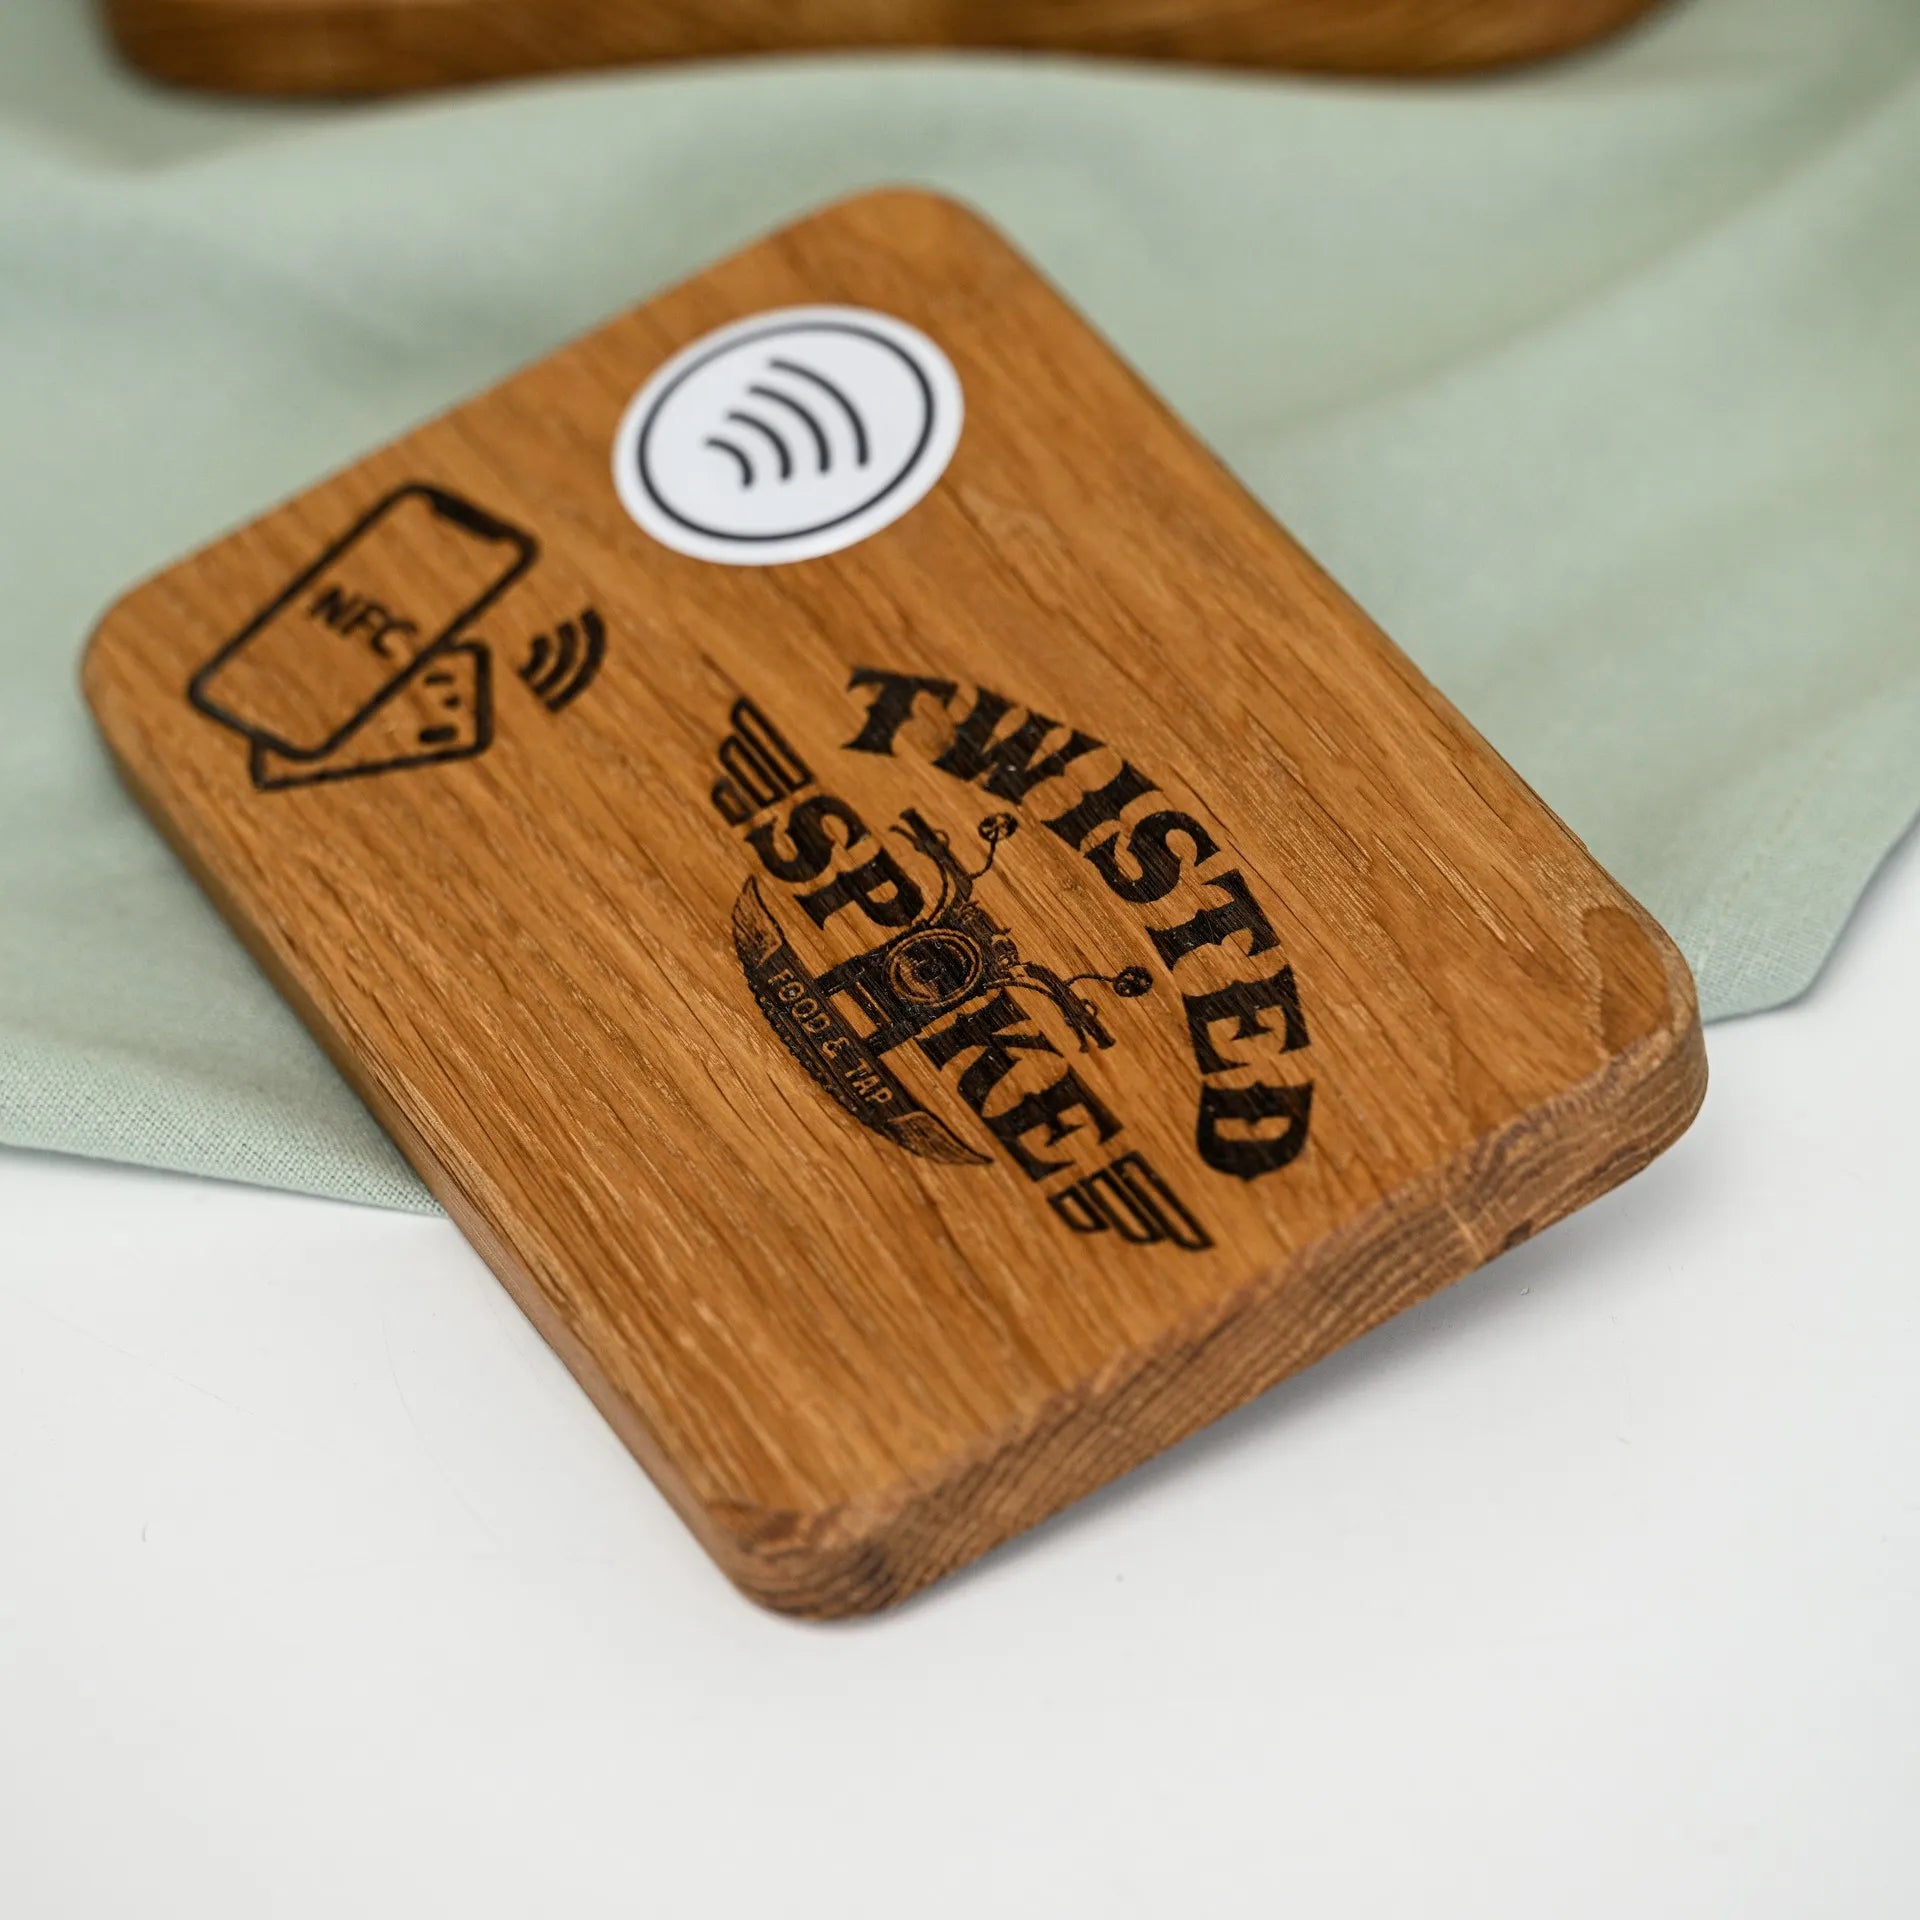 Personalized NFC tag stand with logo engraving, adding convenience and elegance to your payment process.